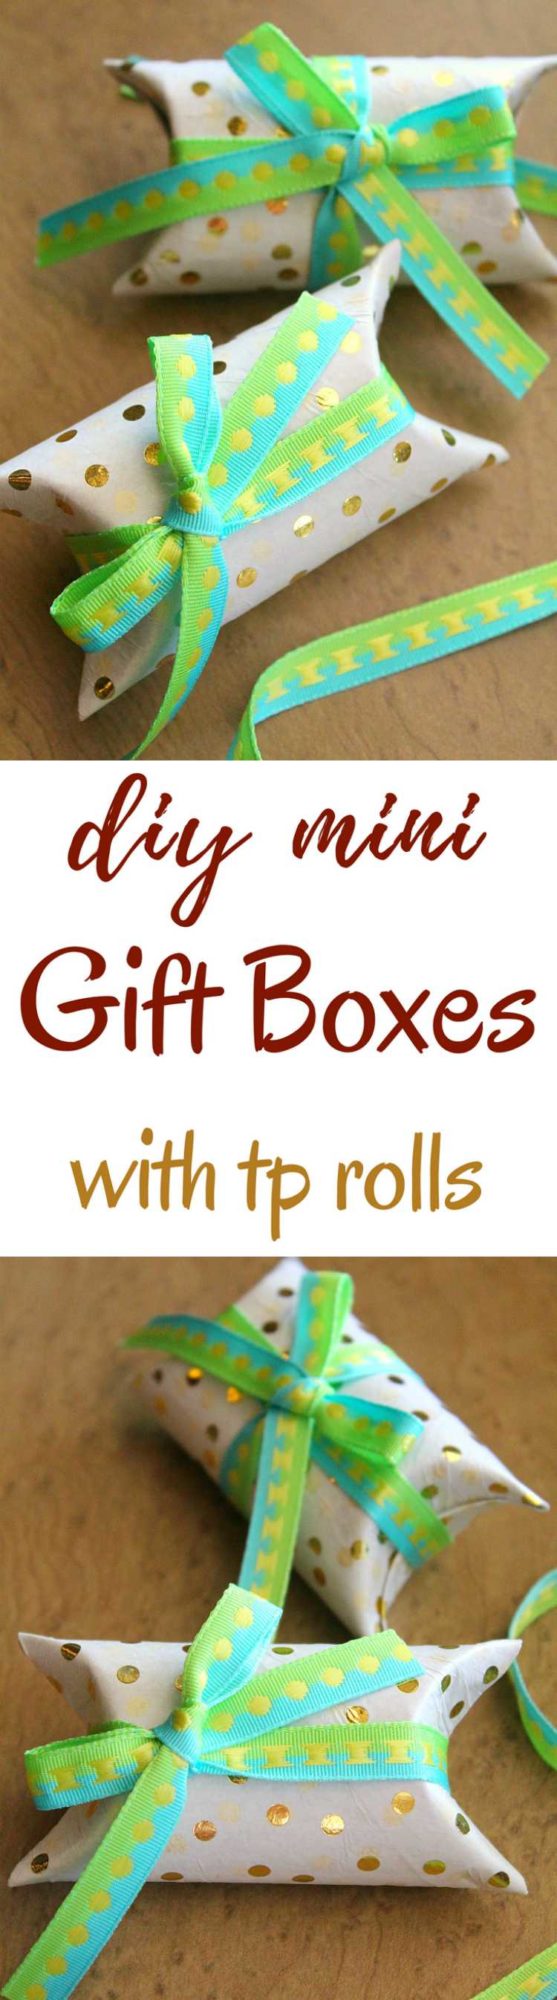 Toilet paper roll gift box